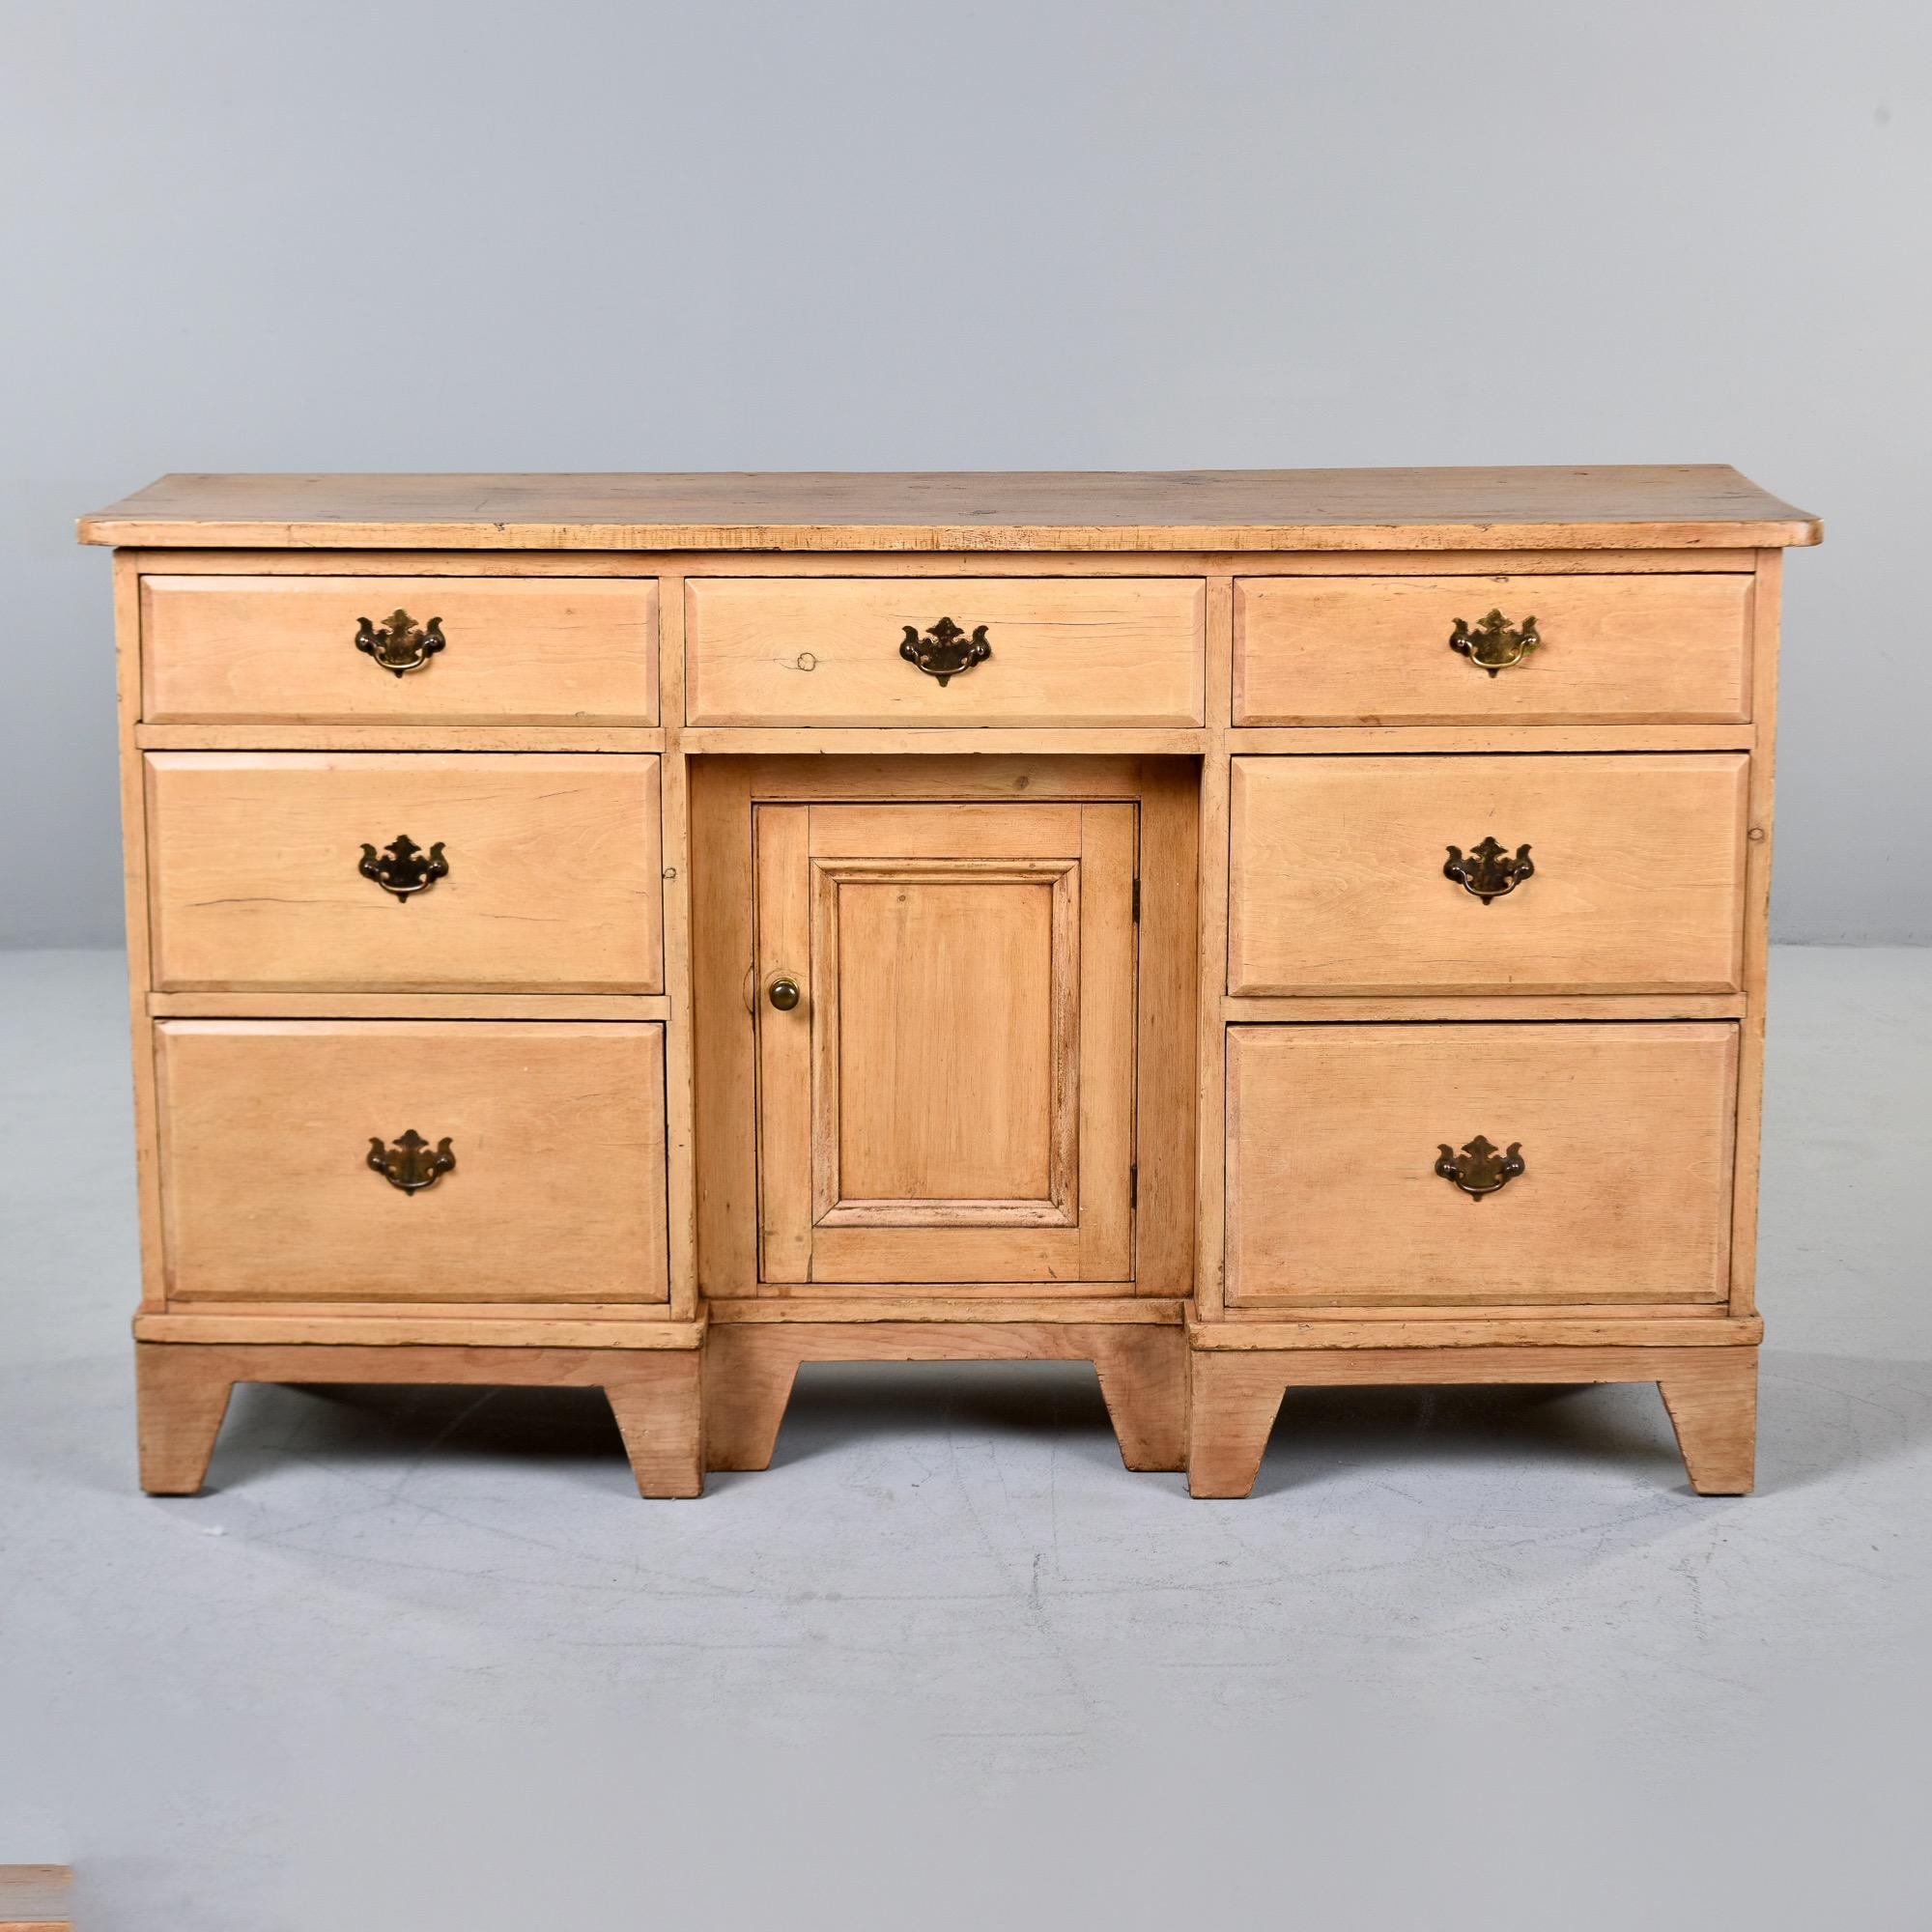 Found in England, this Chippendale style chest dates from approximately 1915. This pine is its natural color with a clear, satin finish. Original brass hardware. Seven functional drawers - one at top center flanked by a stack of three graduated size